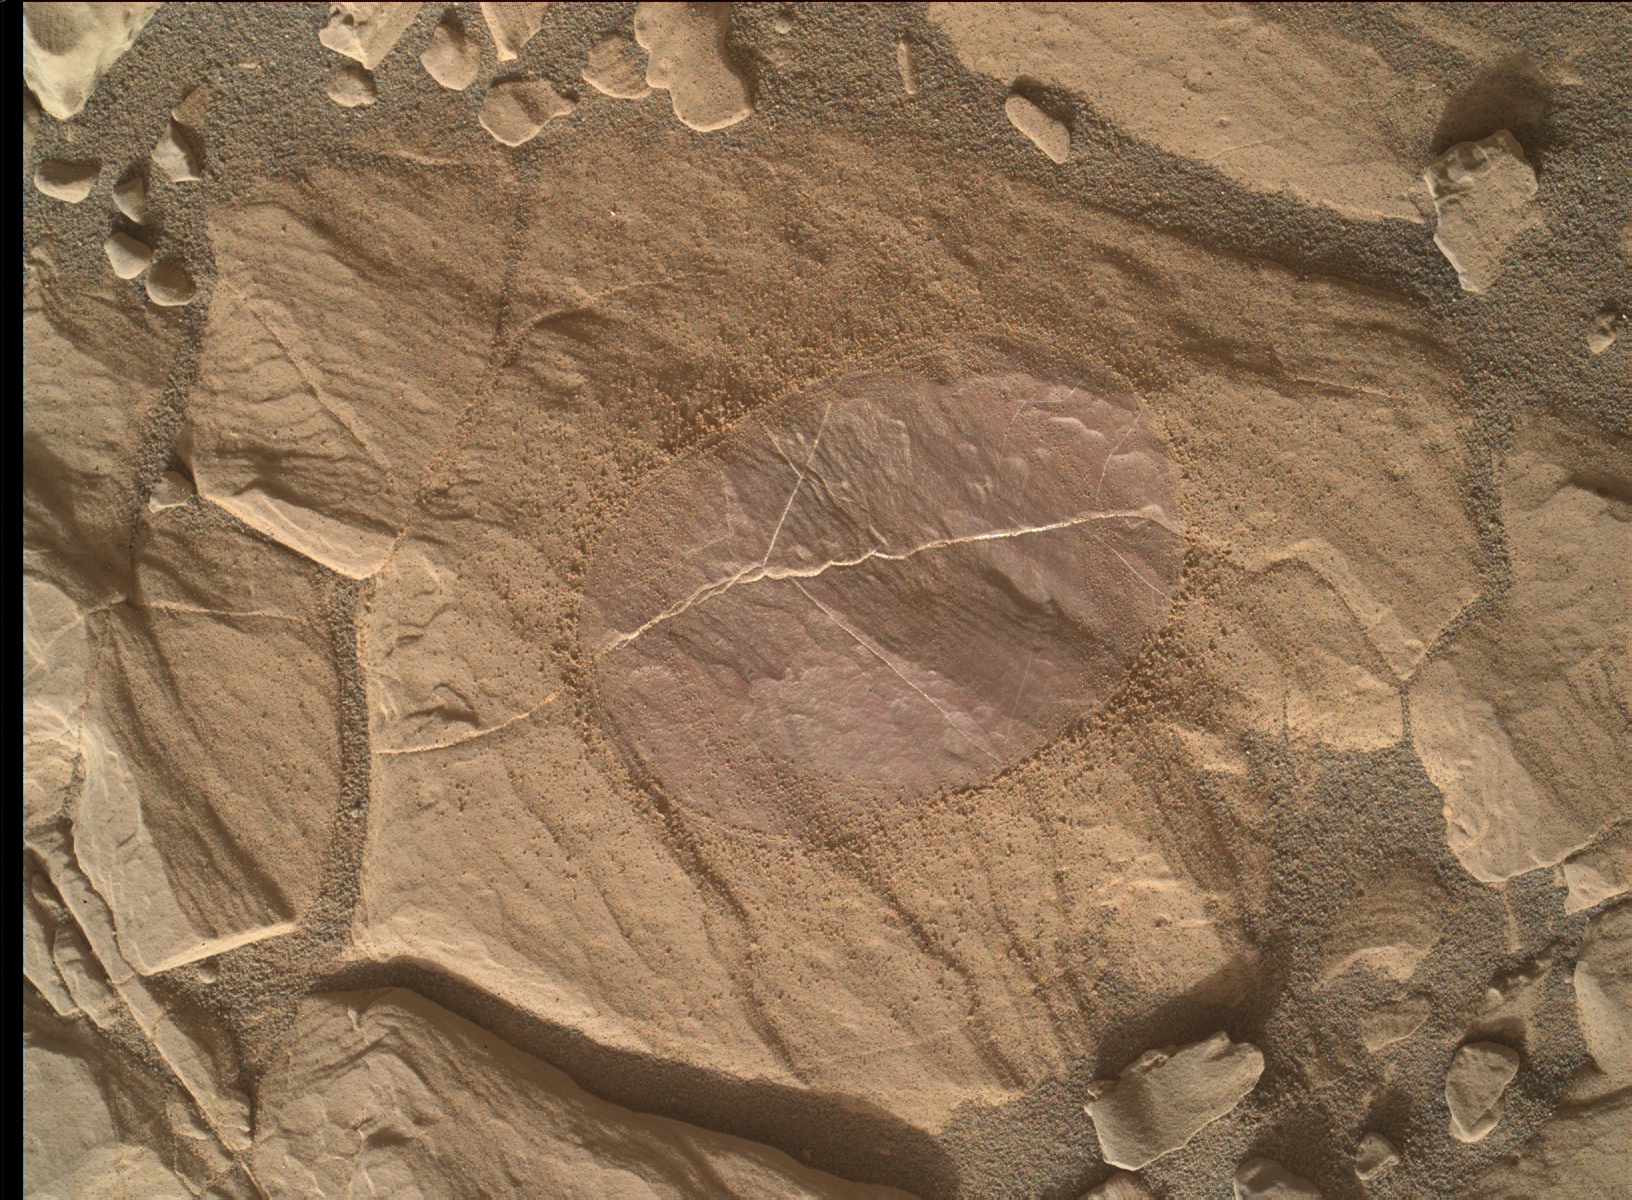 Sol 1820: What lay beneath